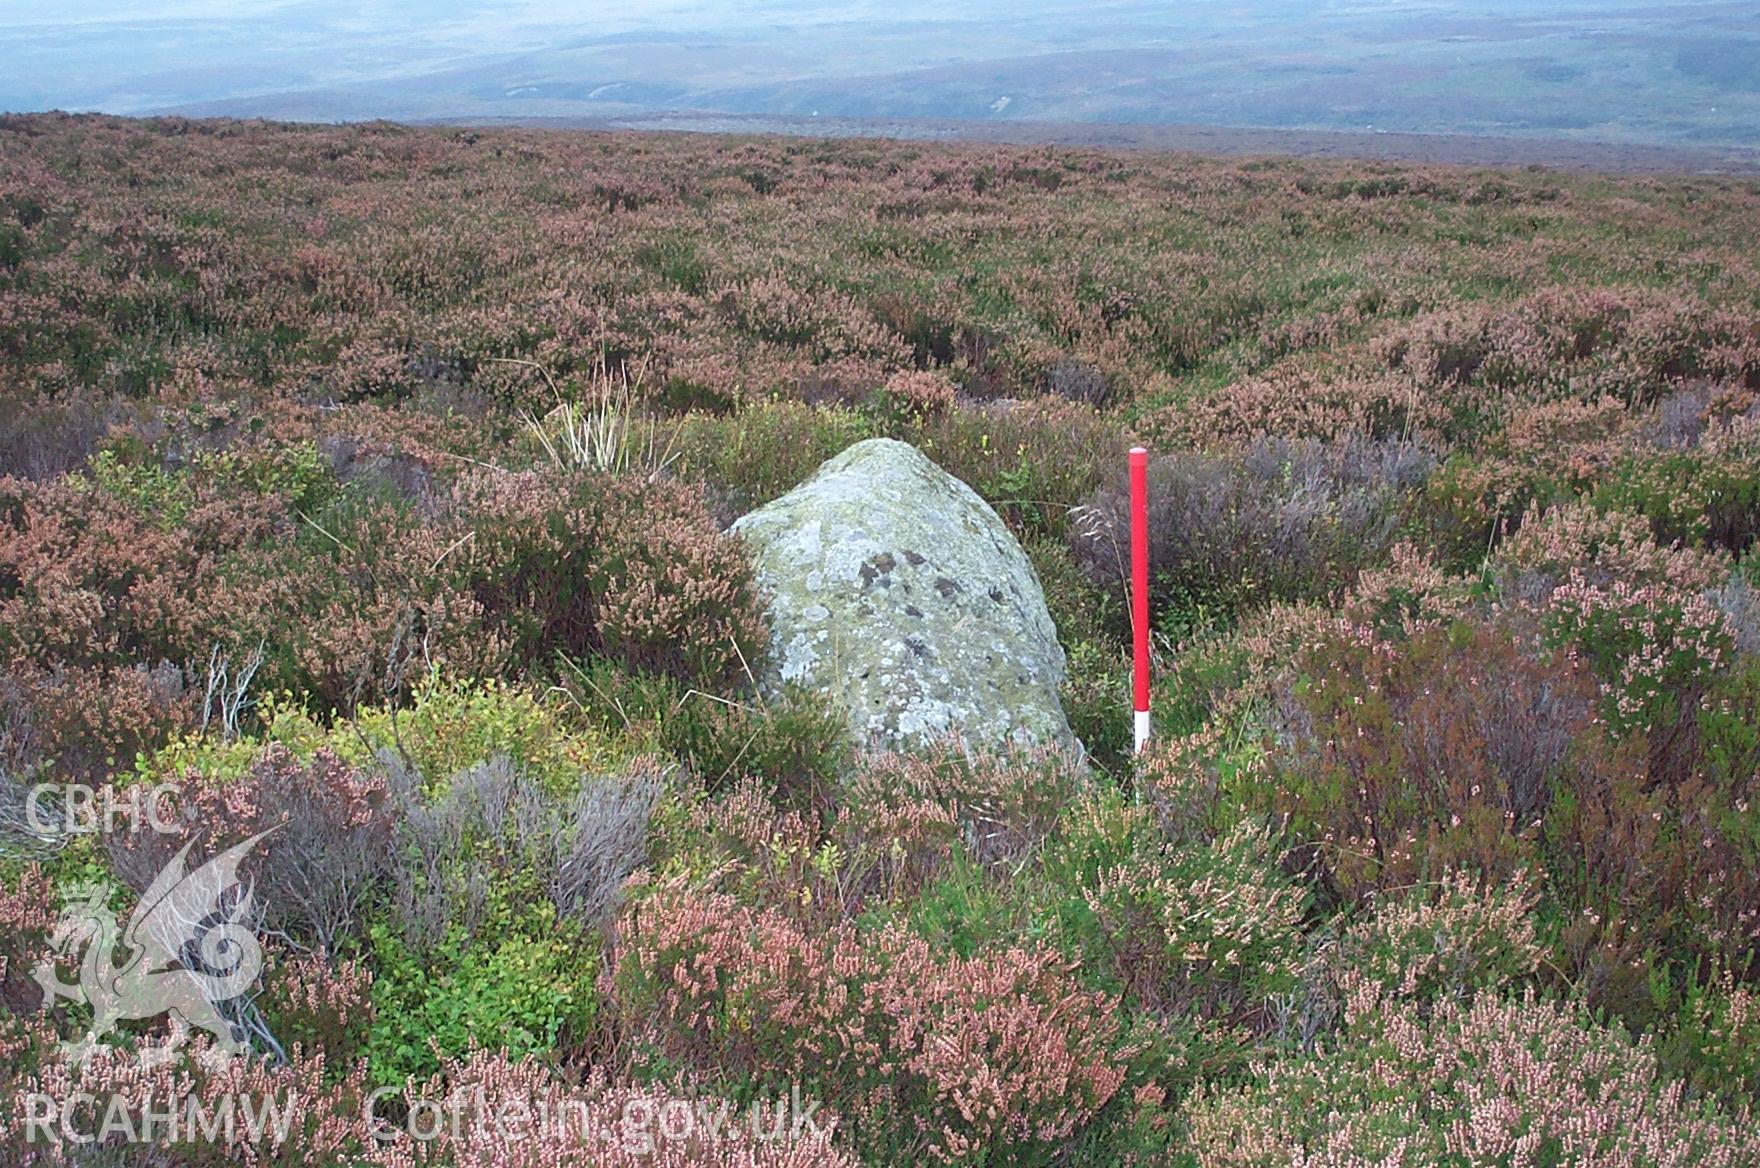 Digital photograph of Llandegla Plantation Standing Stone taken on 10/10/2002 by Oxford Archaeology North during the Ruabon Mountain Upland Survey